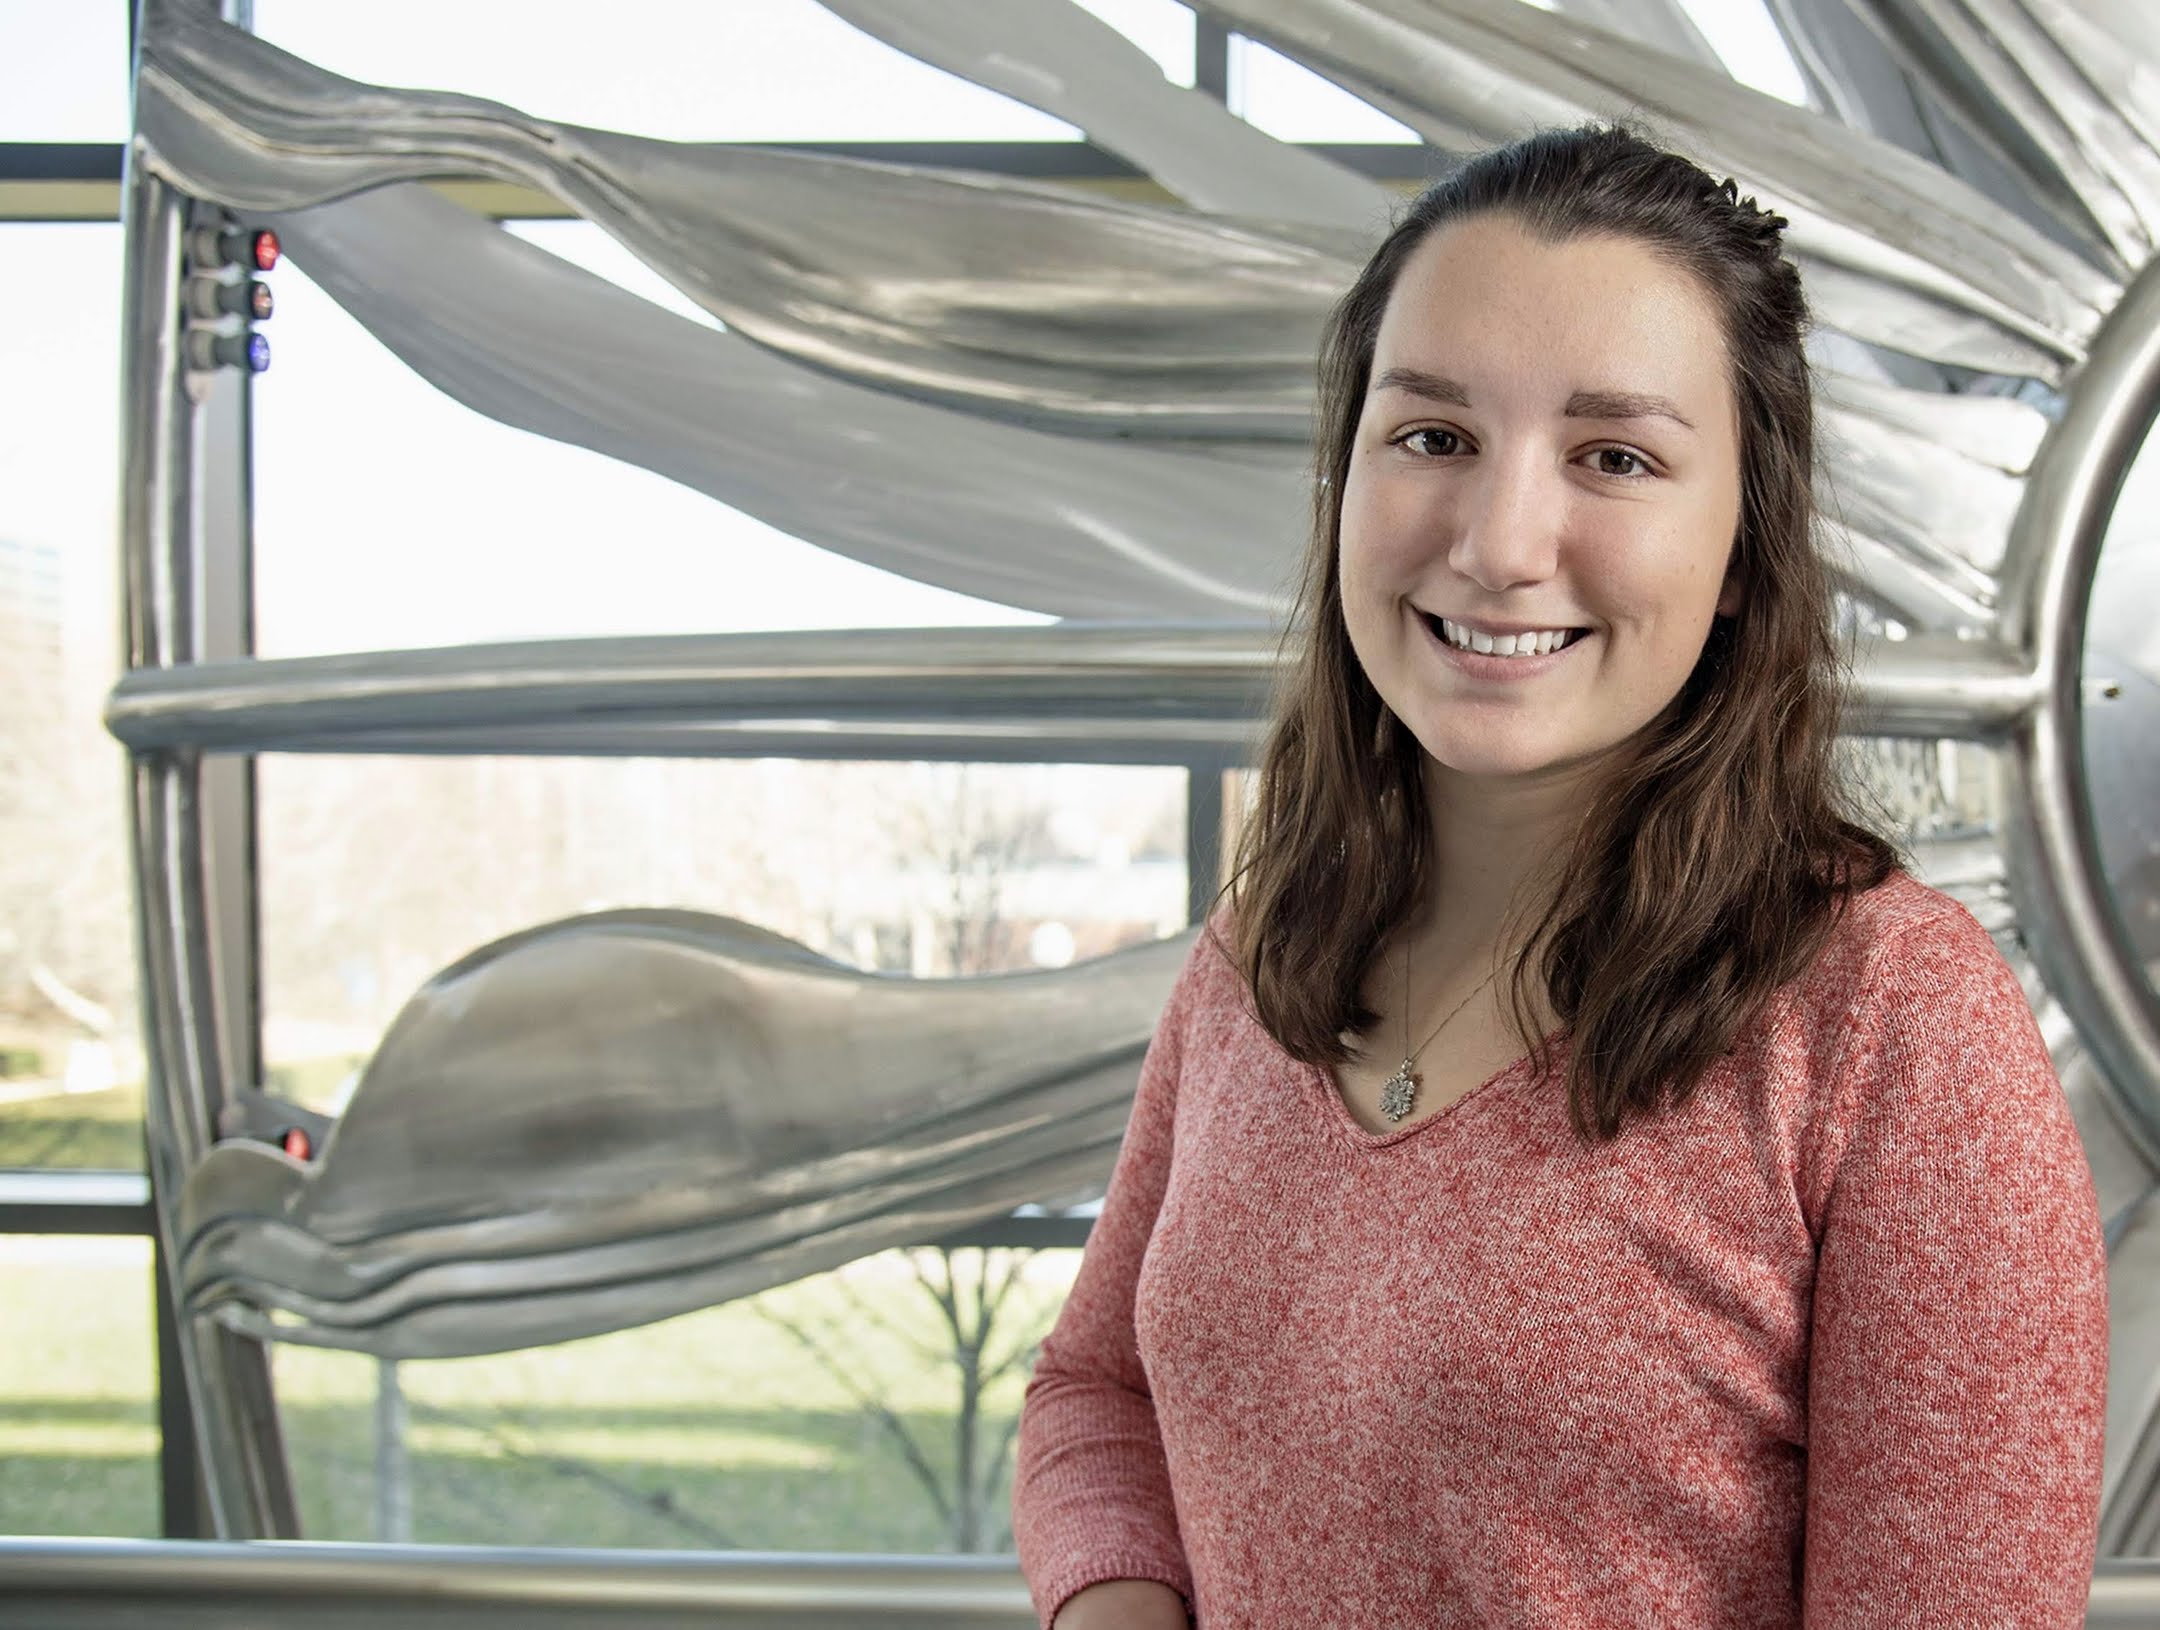 Engineering physics student awarded scholarship for summer research